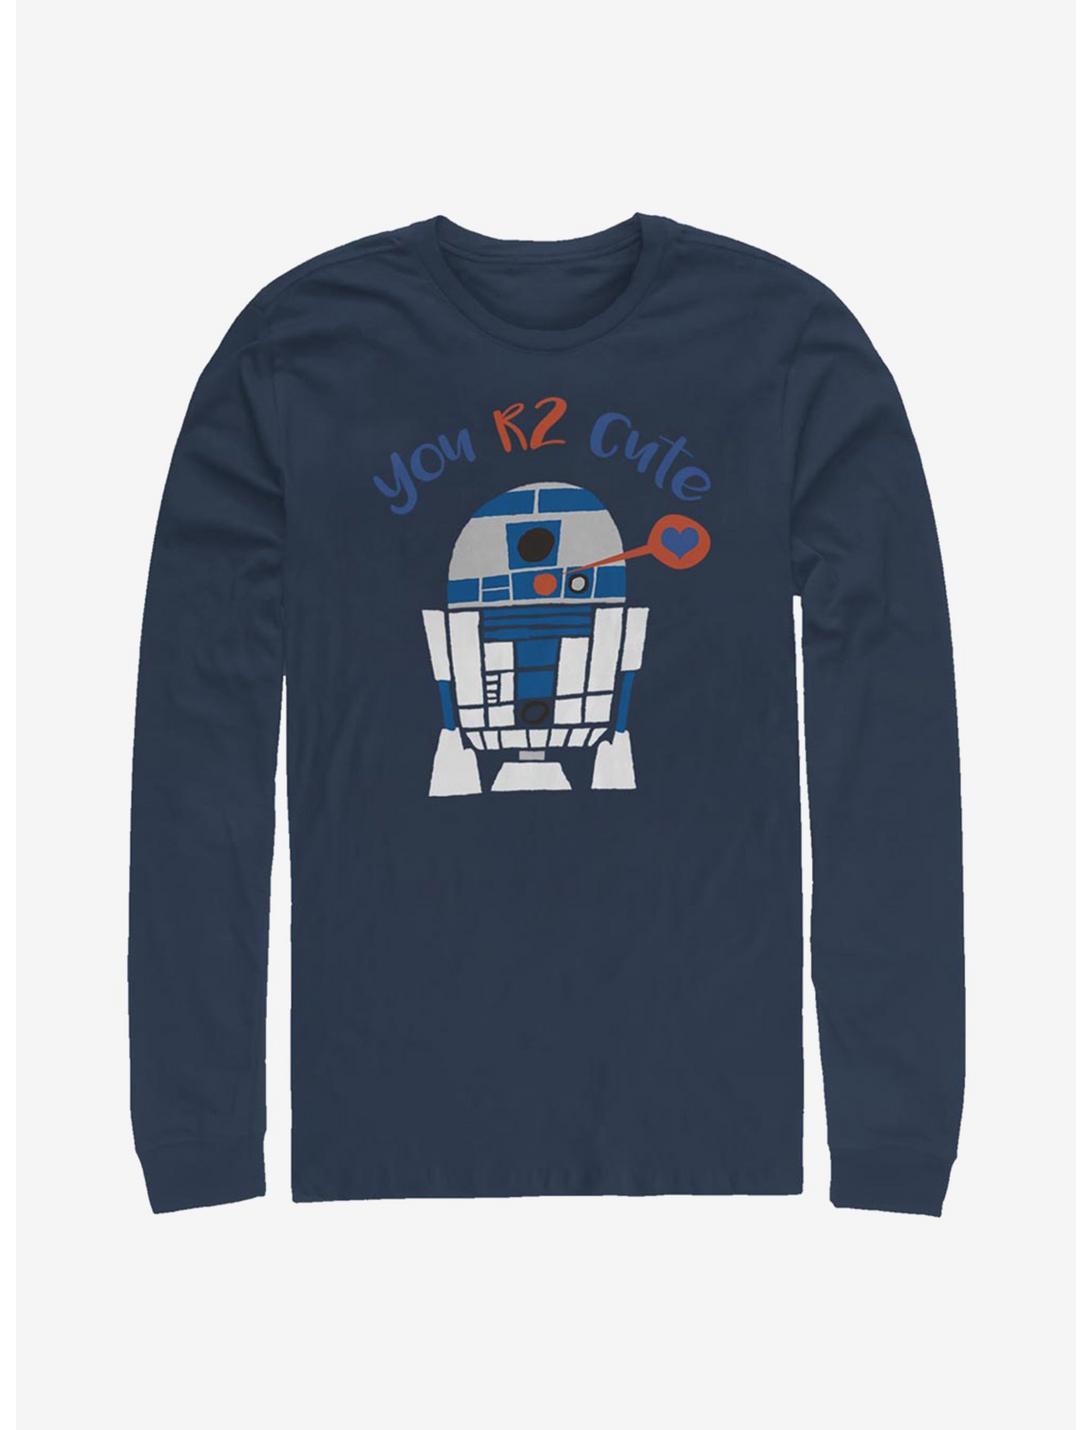 Star Wars Are Too Cute Long-Sleeve T-Shirt, NAVY, hi-res